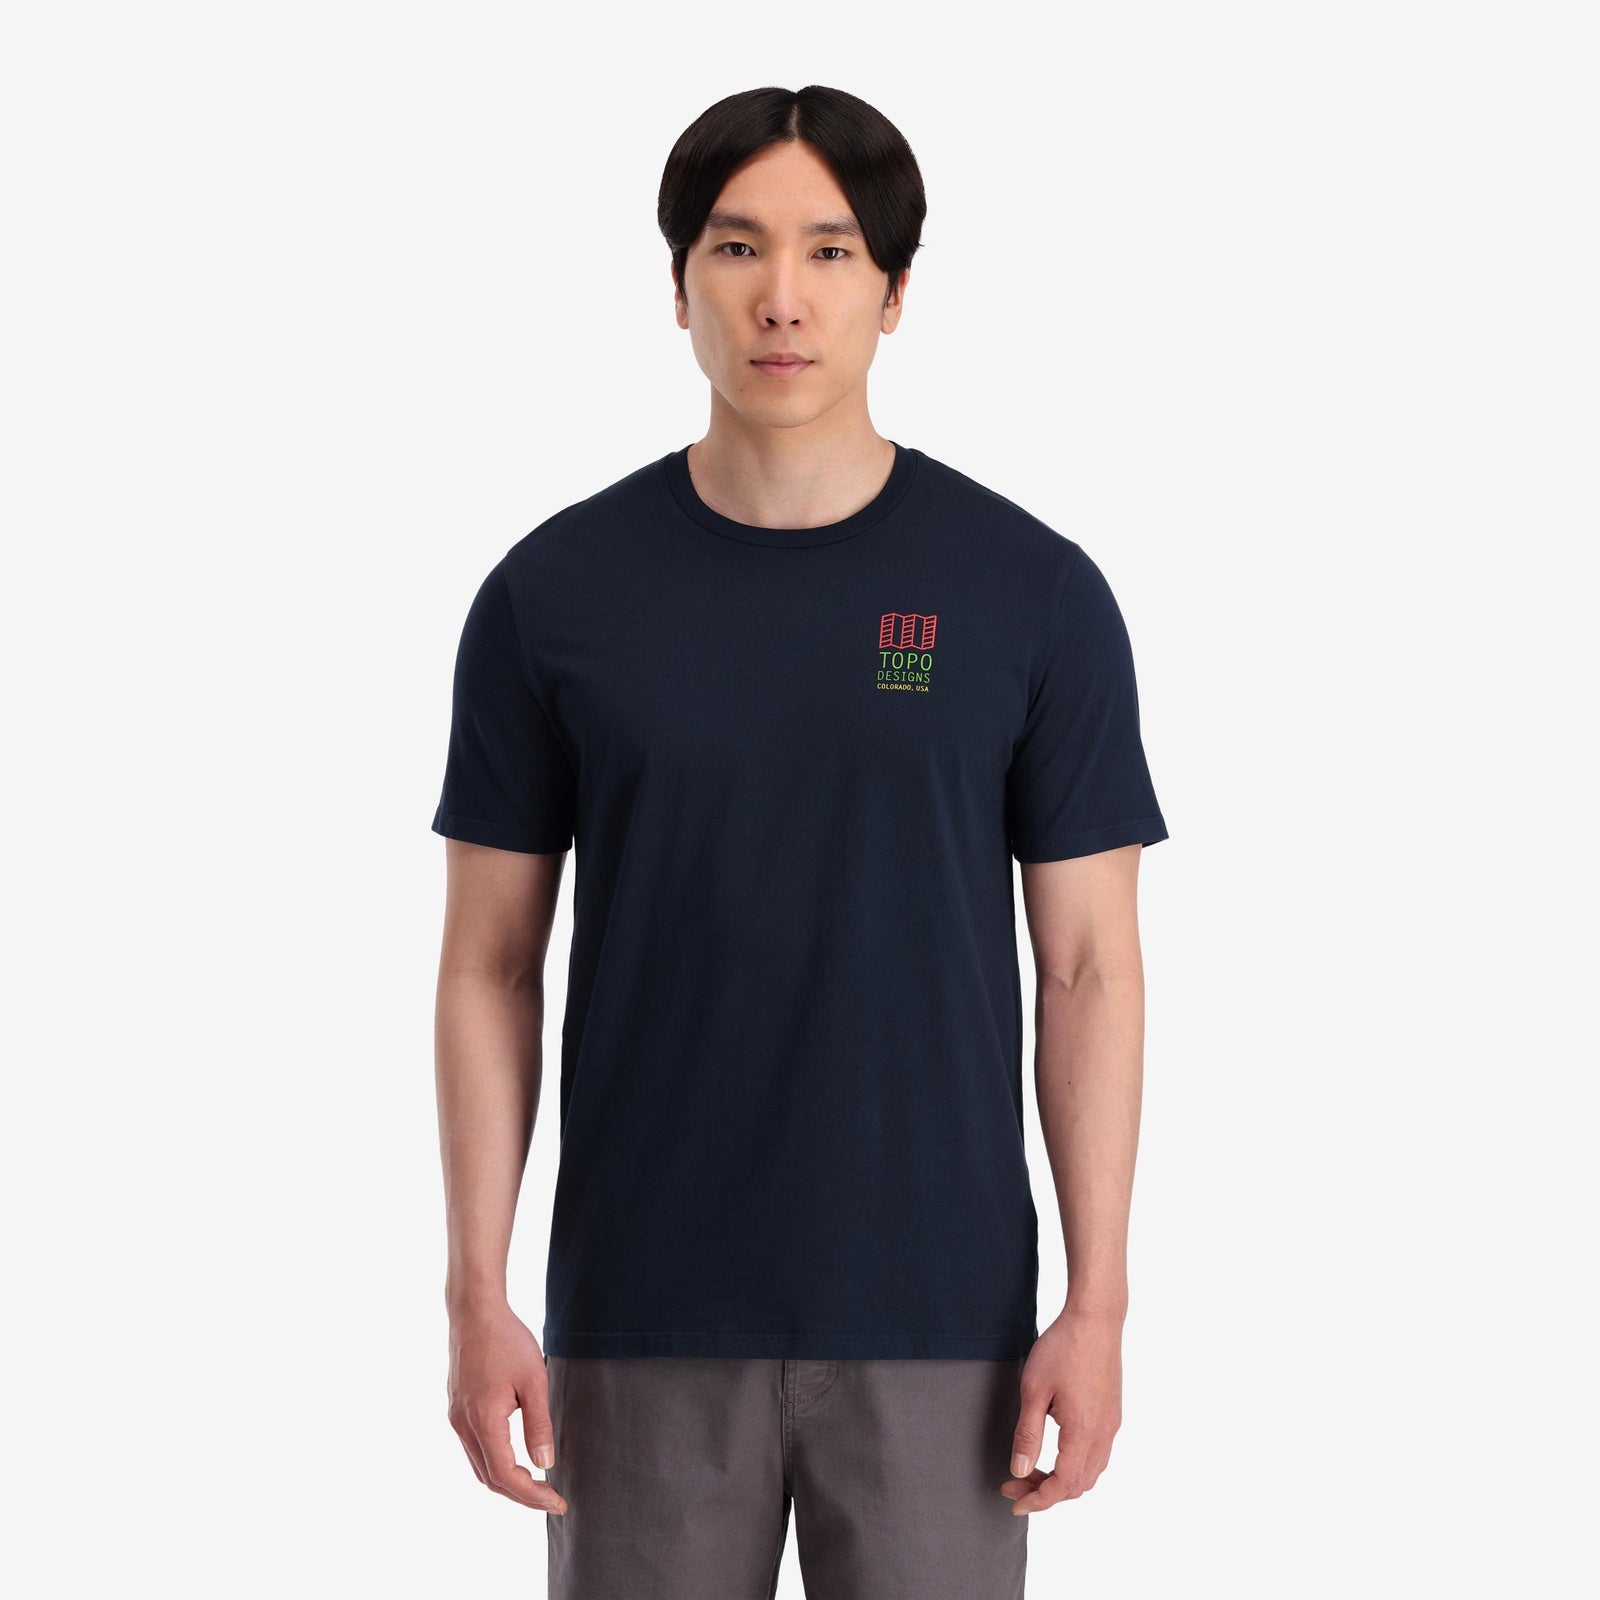 On Model front View of Topo Designs Men's Small Original Logo Tee 100% organic cotton short sleeve graphic logo t-shirt in "navy".